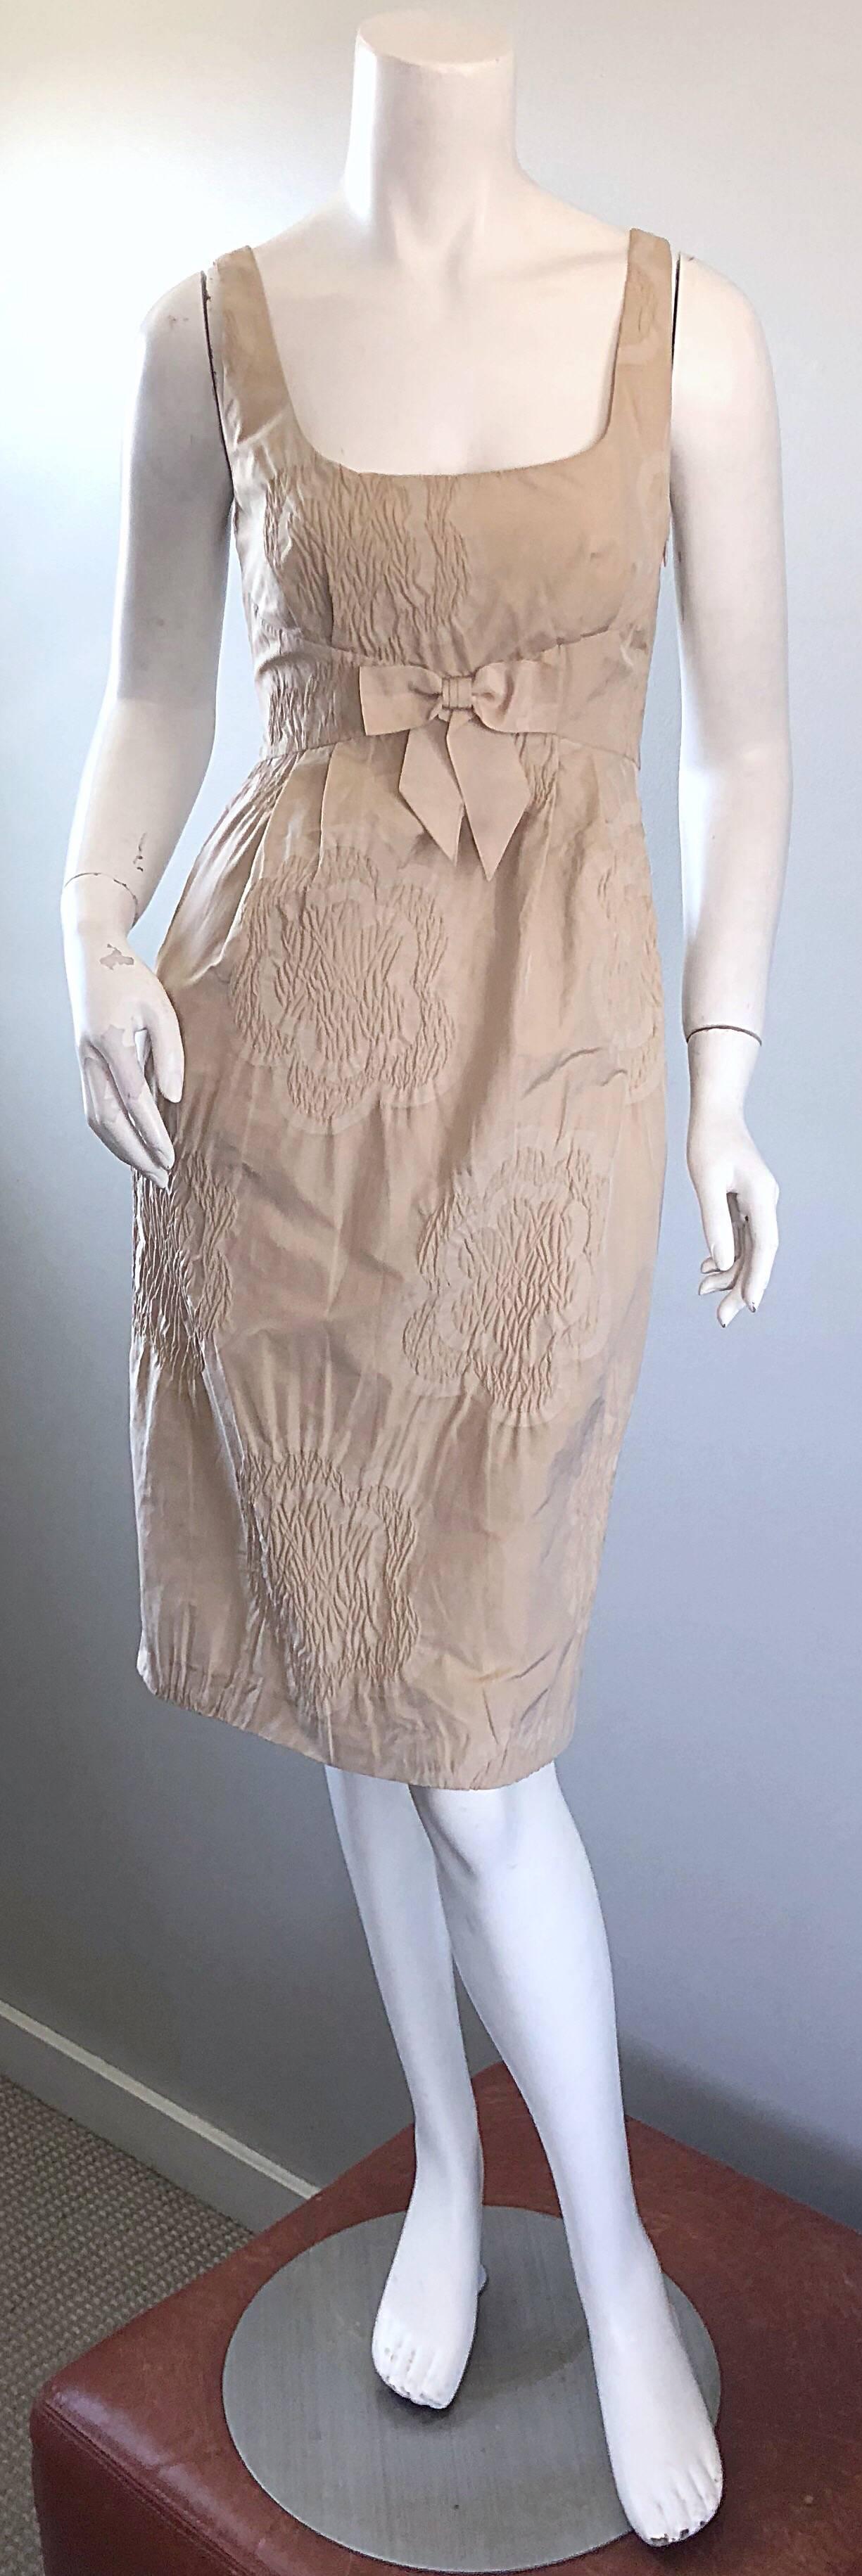 Adorable 1990s MOSCHINO CHEAP & CHIC khaki / beige sleeveless babydoll dress! Features embroidered flowers throughout, with a chic bow detail at upper waist. Hidden zipper up the side with hook-and-eye closure. In great condition.
Made in